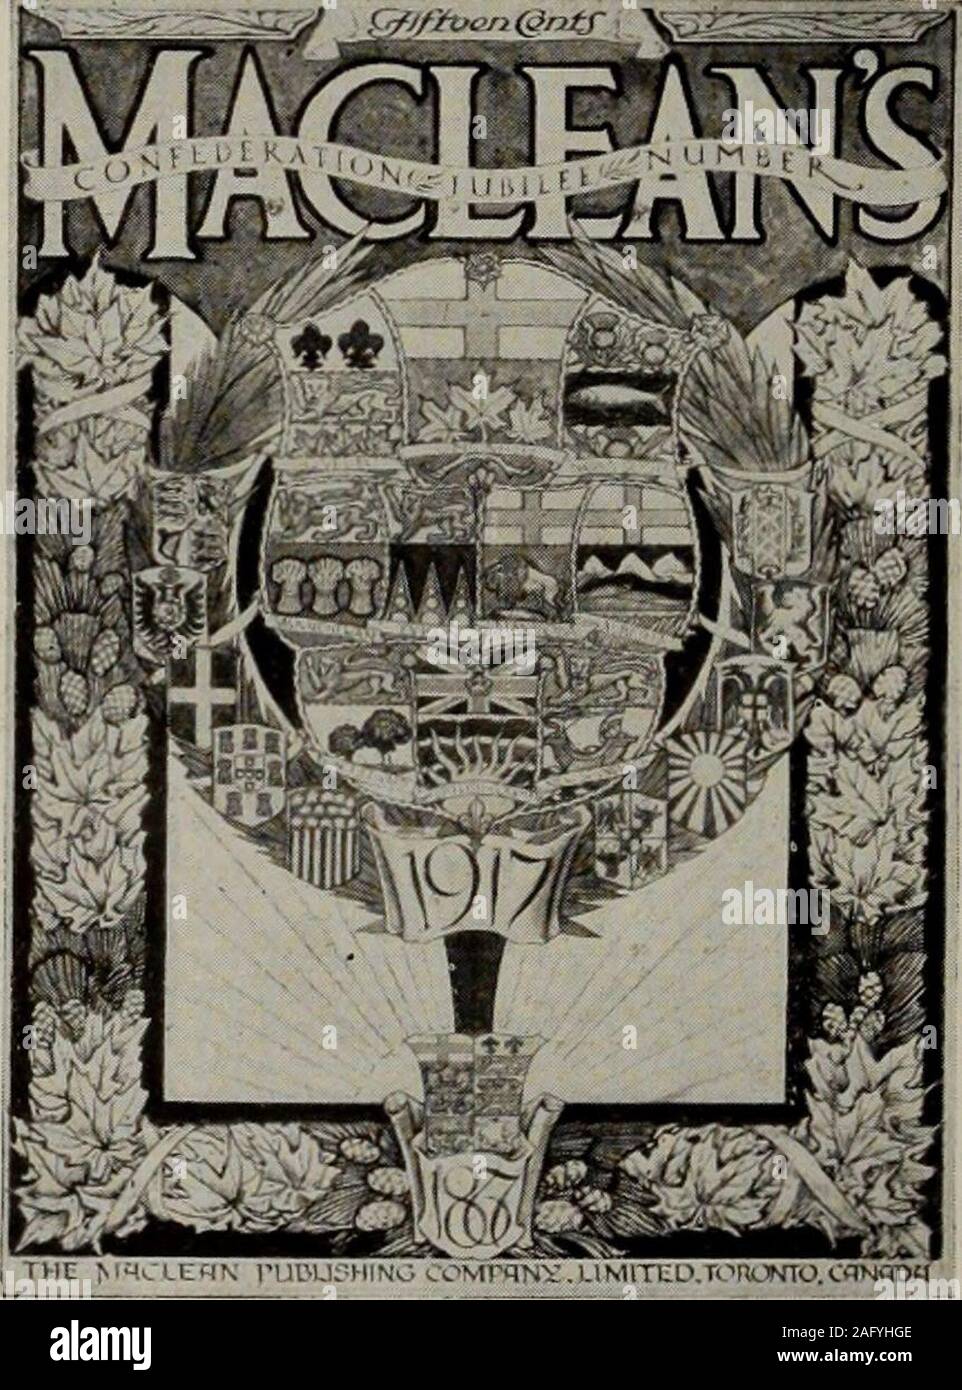 . Hardware merchandising March-June 1917. onfederation the dominant theme of July MACLEANS THE Jubilee of Confederation hasled the Editor to make the JulyMACLEANS retrospective and in-terpretive of Confederation in the char-acter of its main contents—this to meetthe certain need and desire of theCanadian people. Note the fine pro-vision of special Confederation articleand features : THE MEETING OF MACDONALD AND BROWN. By C. W. Jefferys. a frontispiecepainted for MACLEANS. THE STORY OF CONFEDERATION.By Thomas Bertram. A colorfulnarrative of the bringing about ofthe union of provinces. FIFTY YEA Stock Photo